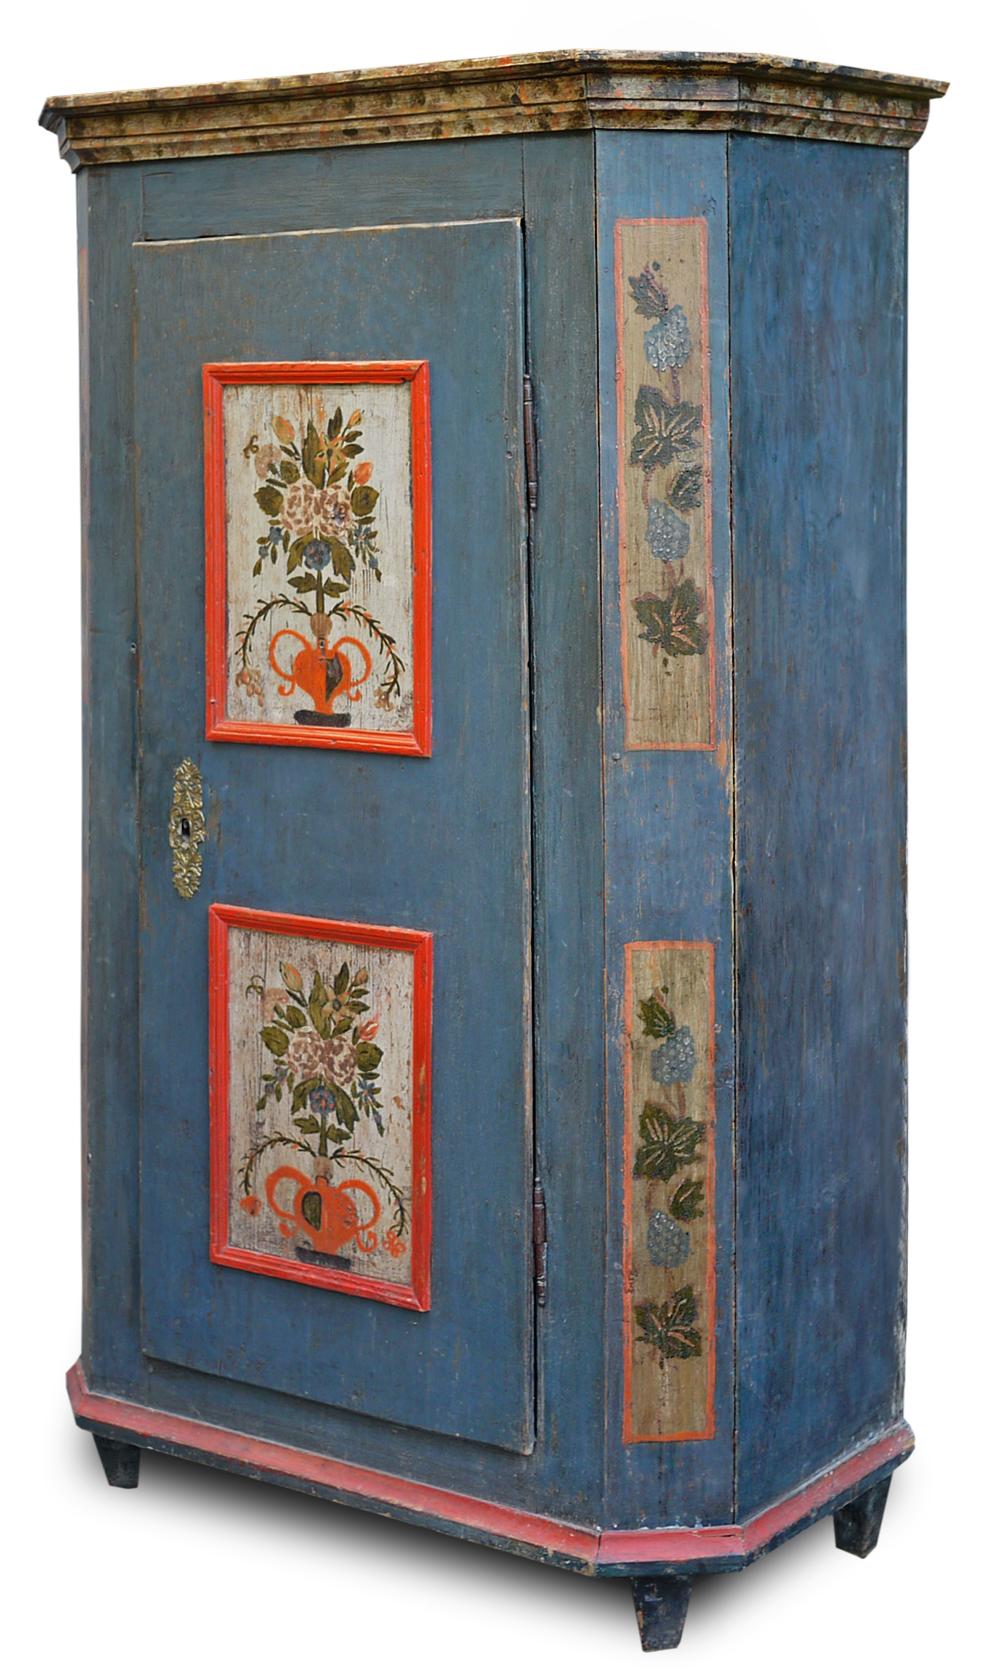 Antique blue painted Tyrolean wardrobe

H.190 cm - L.105 cm - P.45 cm

Tyrolean wardrobe entirely painted in blue with floral decorations, with a linear profile and pleasant geometric composure.

On the door, two carmine-colored frames have as